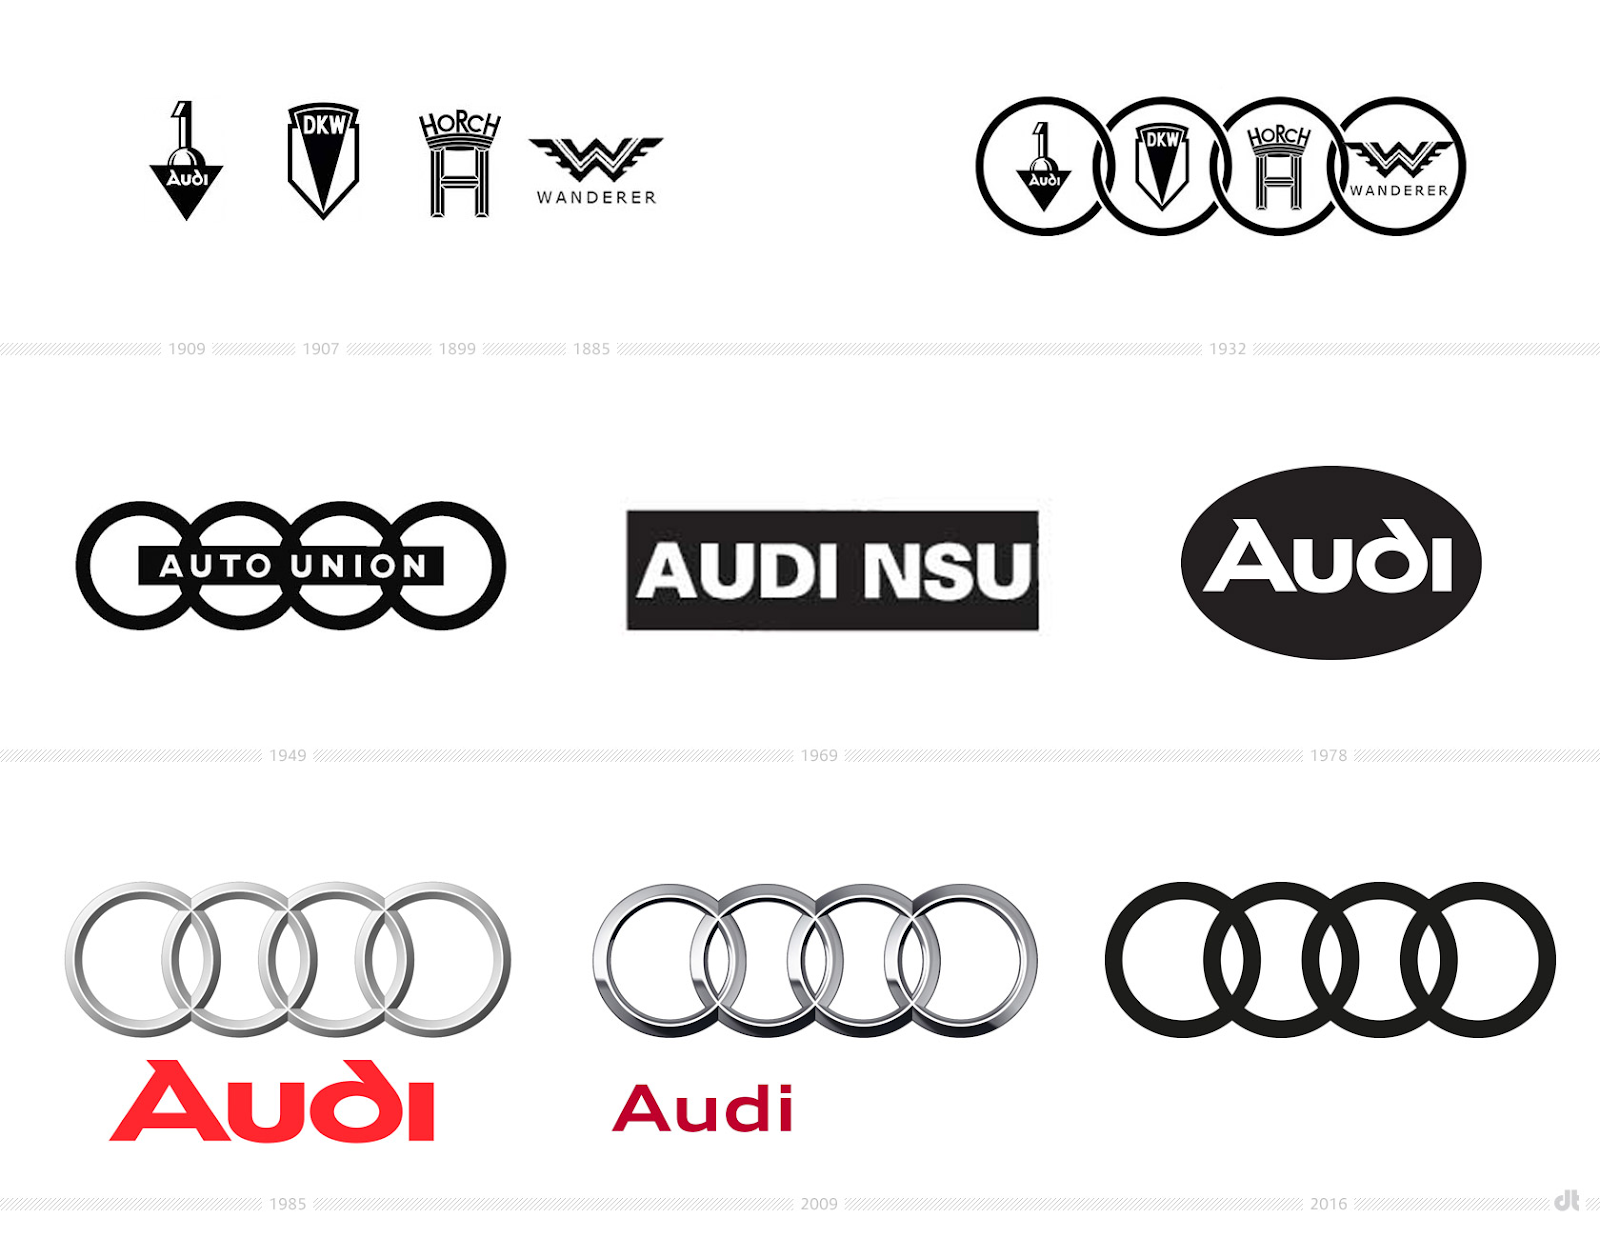 Audi logo history and where the name Audi came from